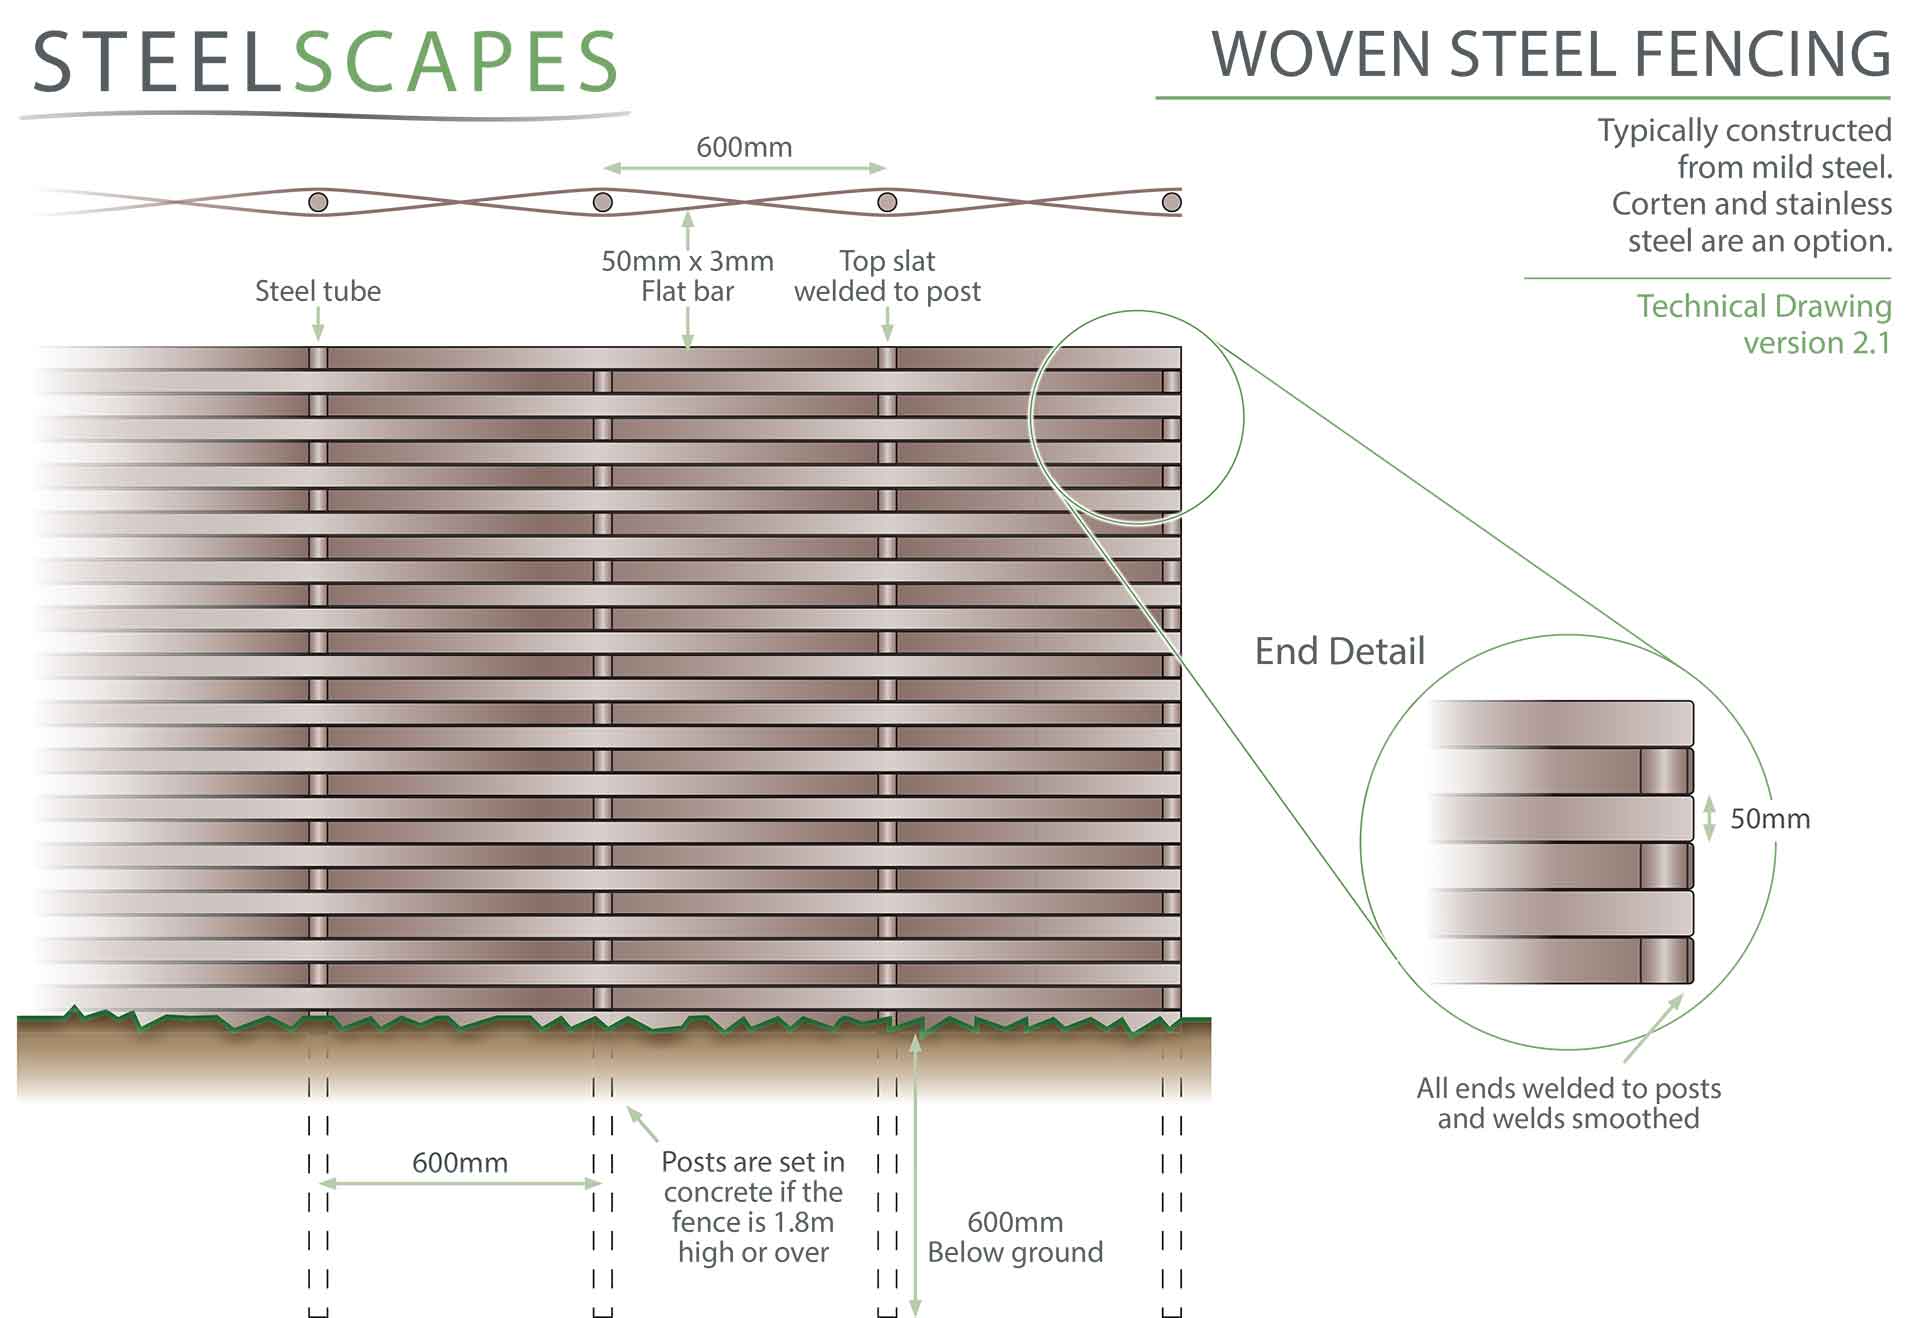 woven steel technical drawing